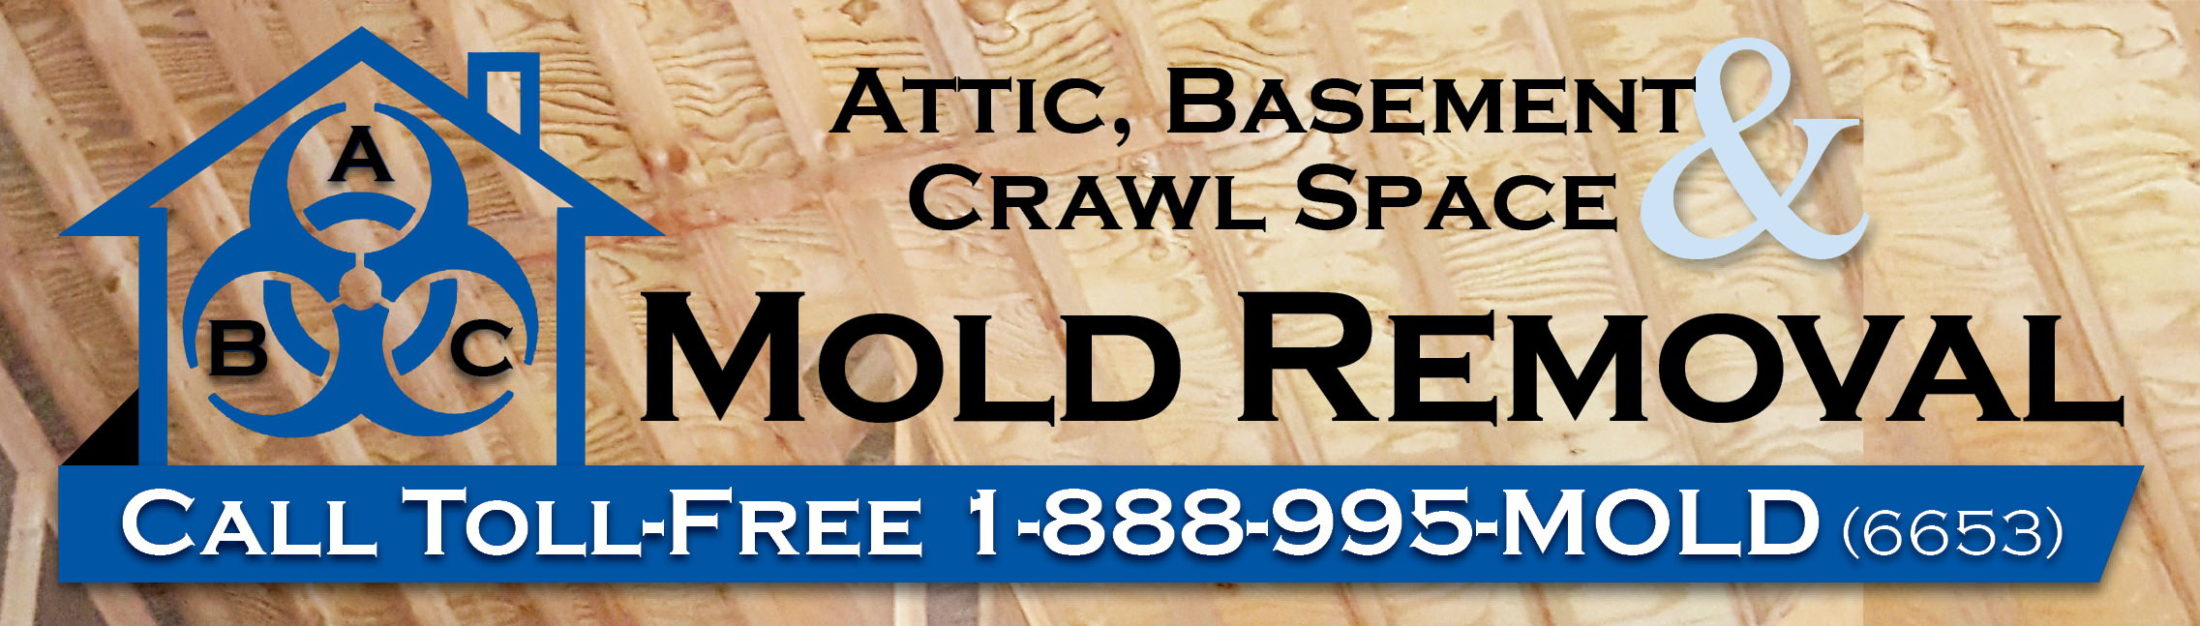 ABC Mold Removal - Attic Basement and Crawl Space Mold Remediation Company